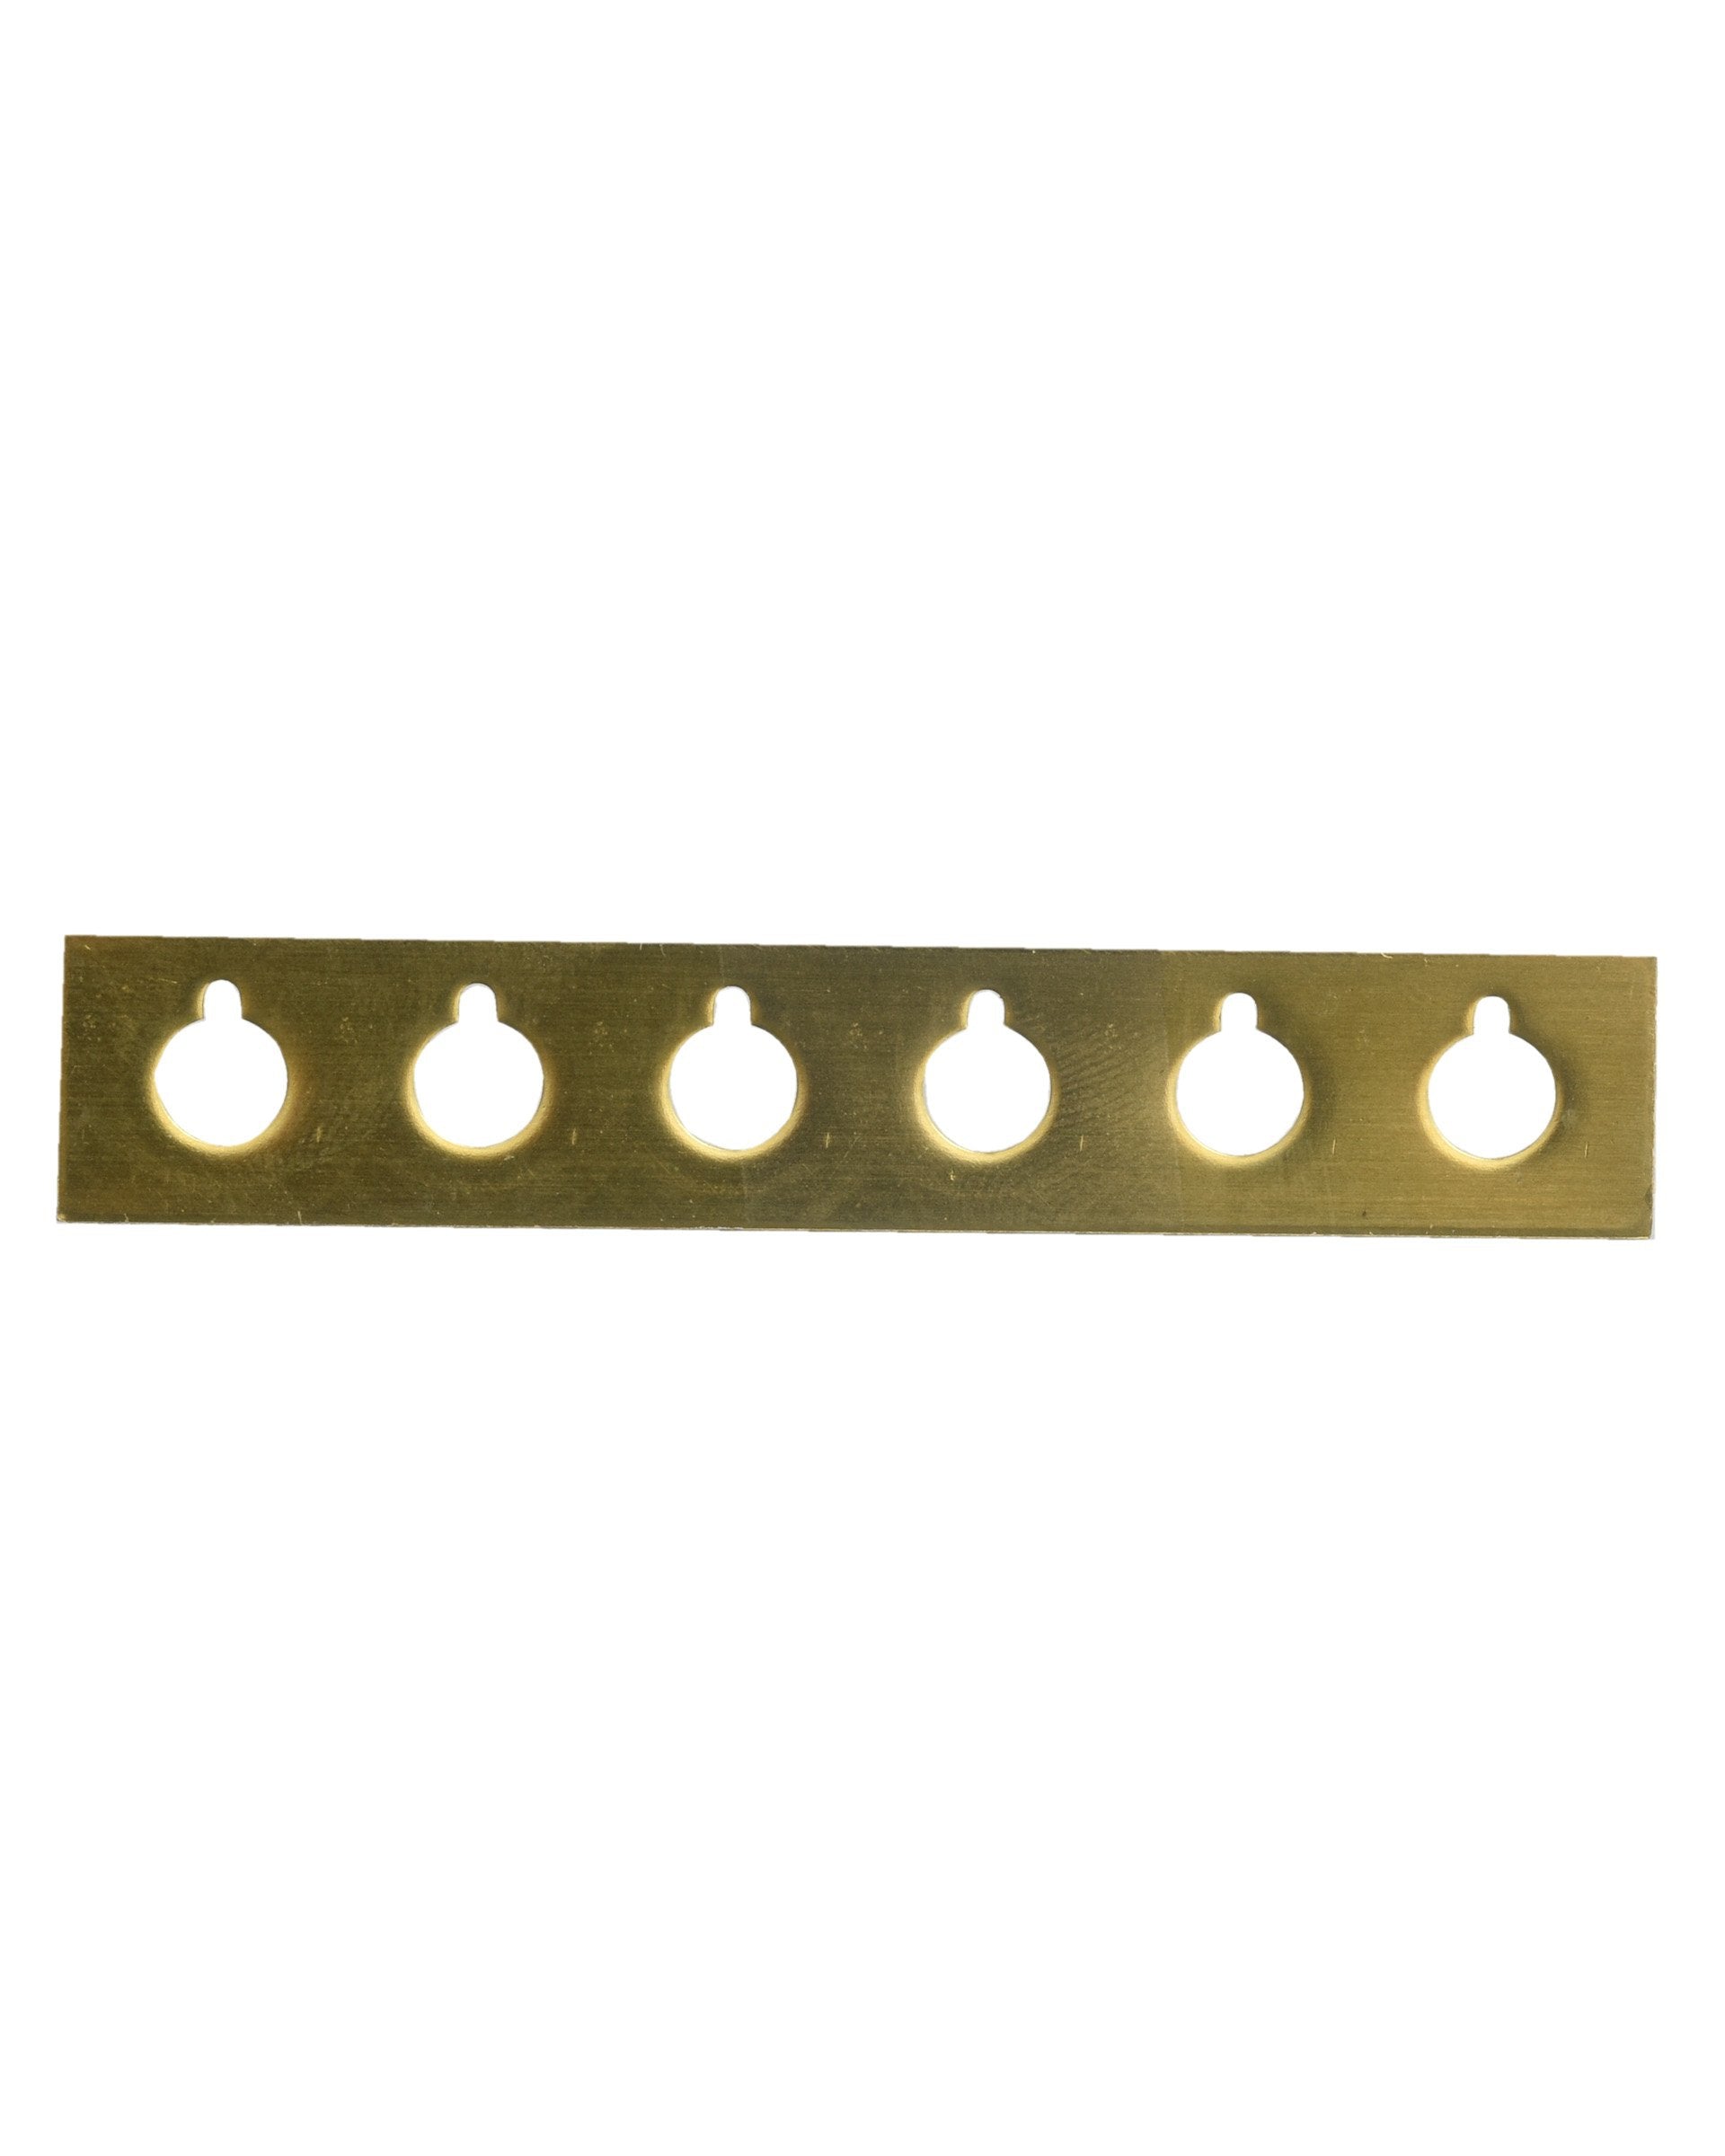 Image 1 of Mitchel's Acoustic Guitar "Plate Mate", 2 1/4" Spacing - SKU# PM100-2-1/4 : Product Type Accessories & Parts : Elderly Instruments